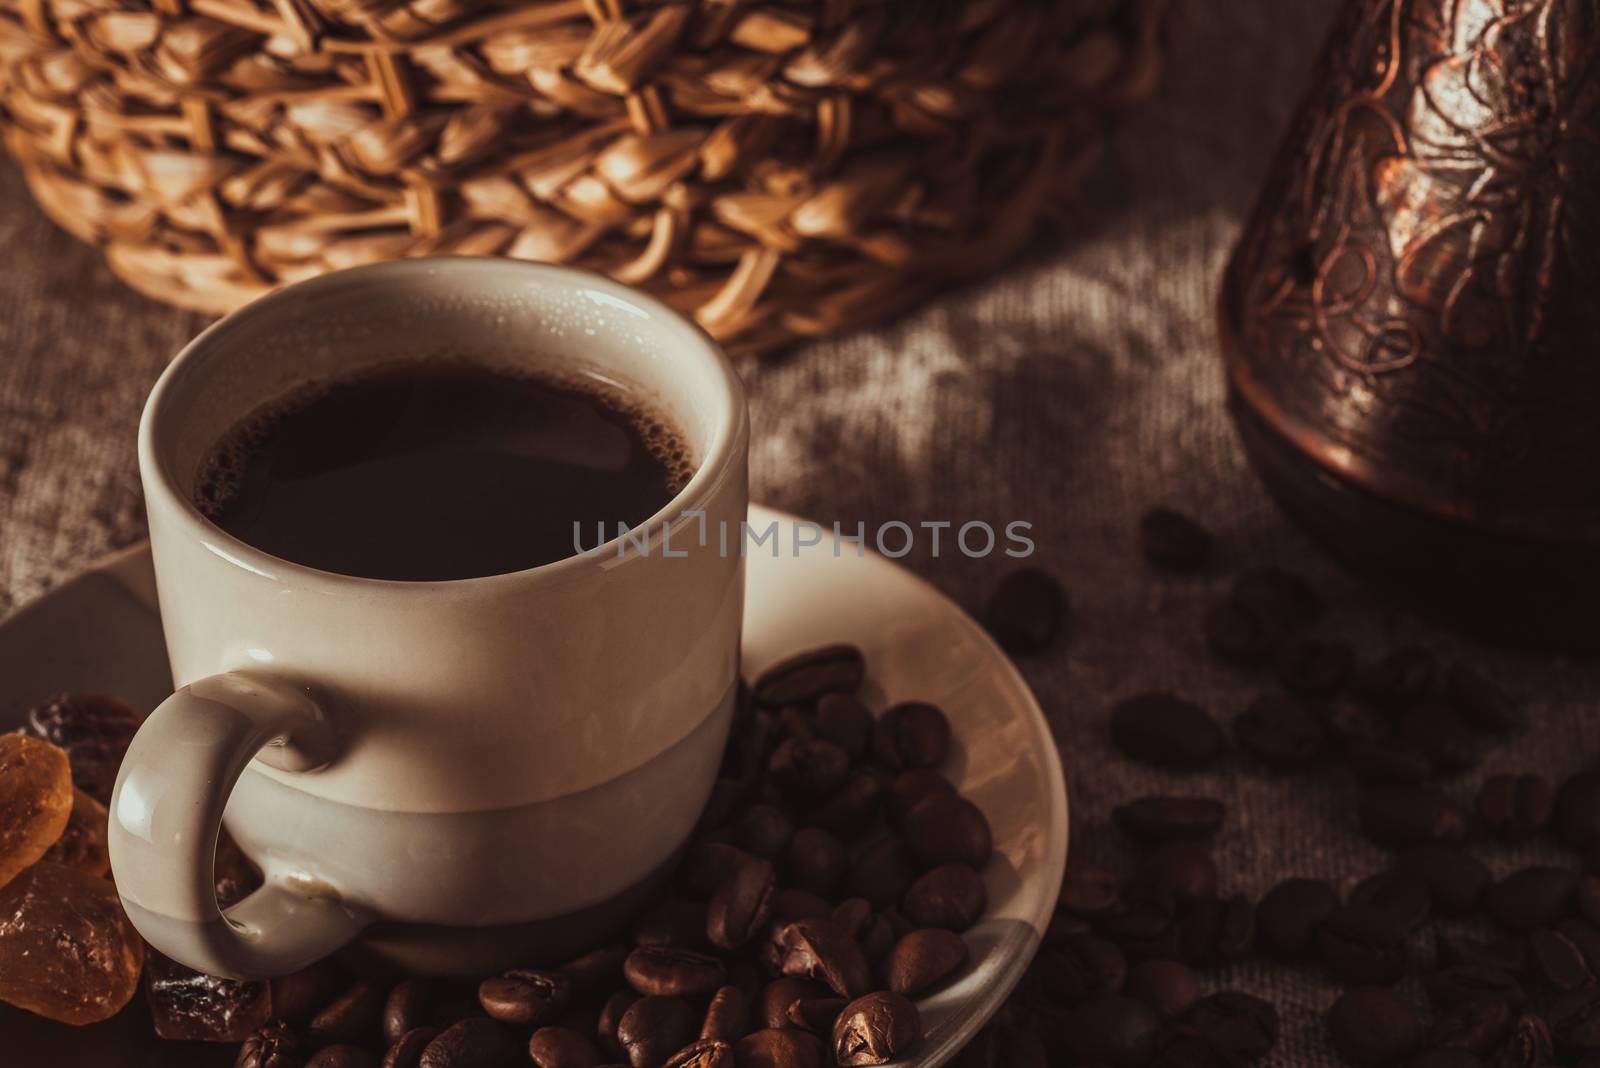 A cup of coffee on textile with coffee beans, dark candy sugar, pots, basket